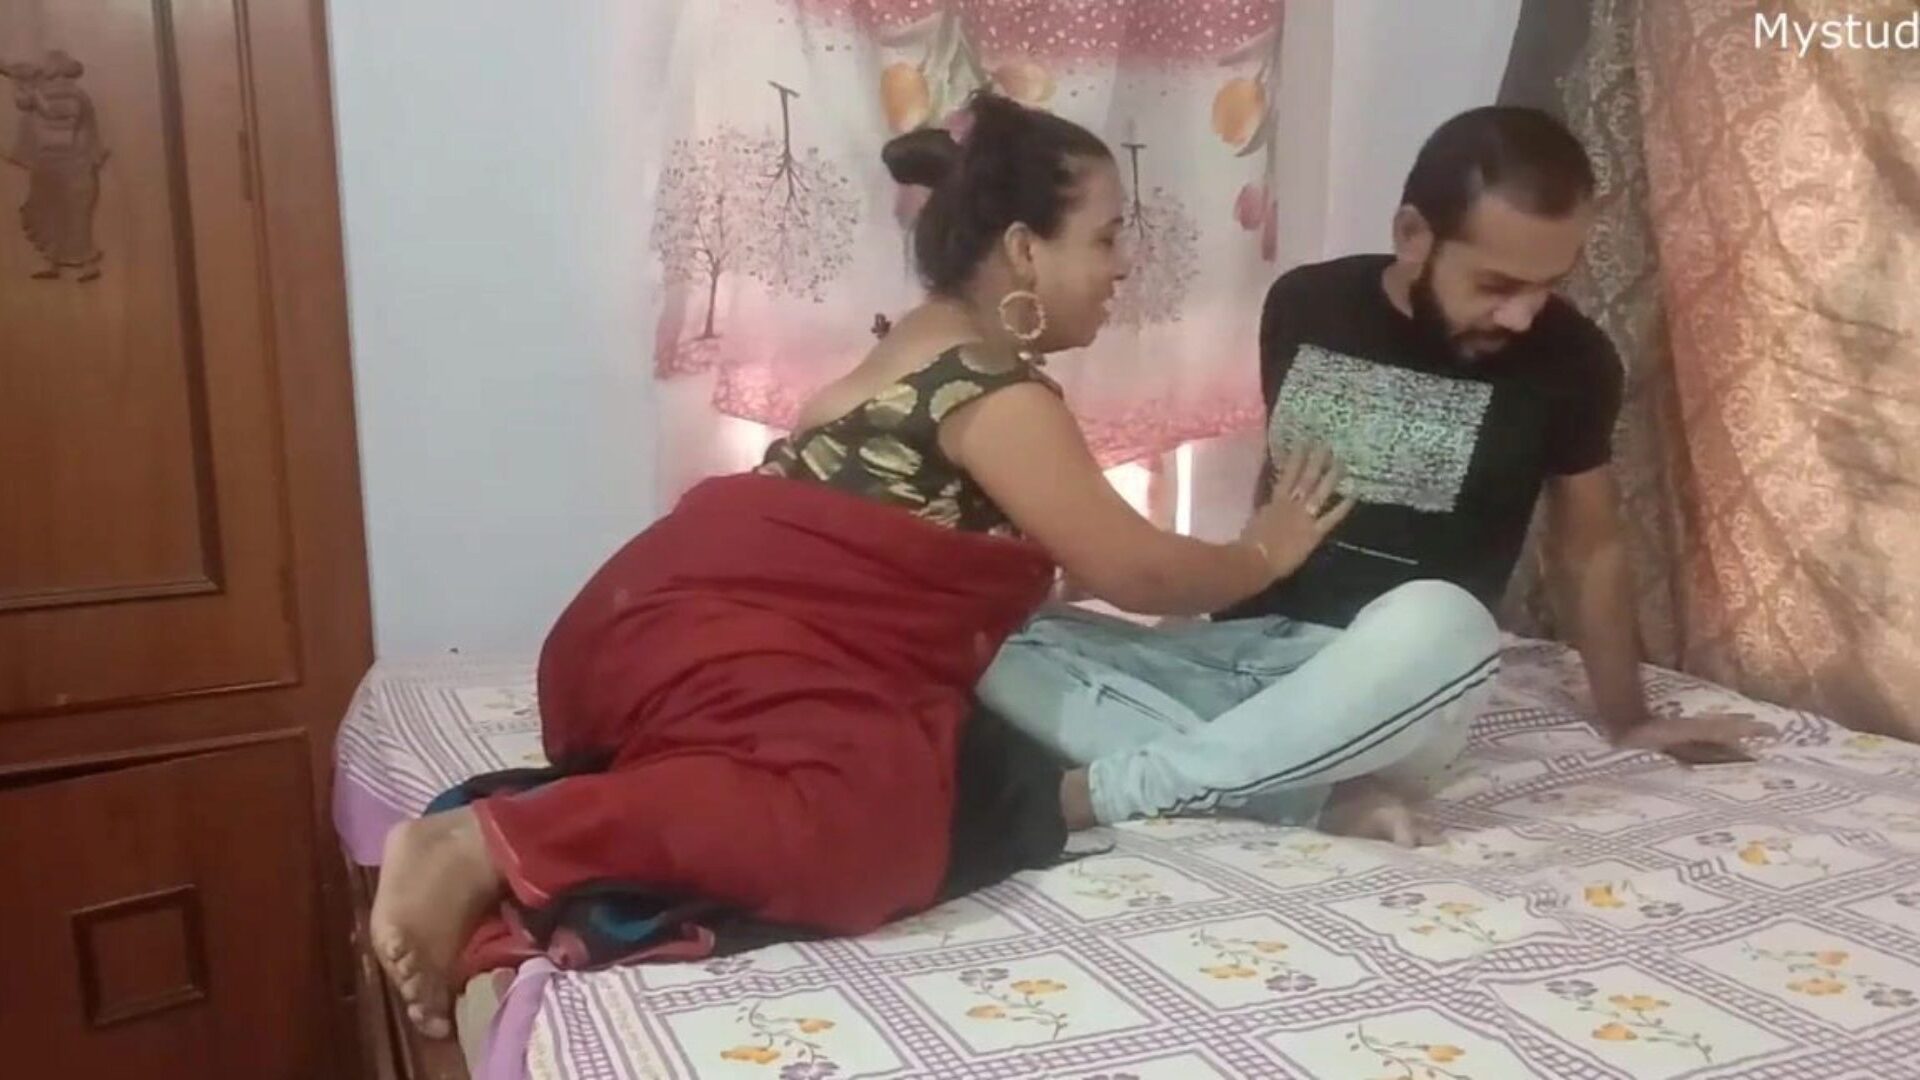 Indian Brother & Cousin Sisters best romp movie scene with clear audio and music